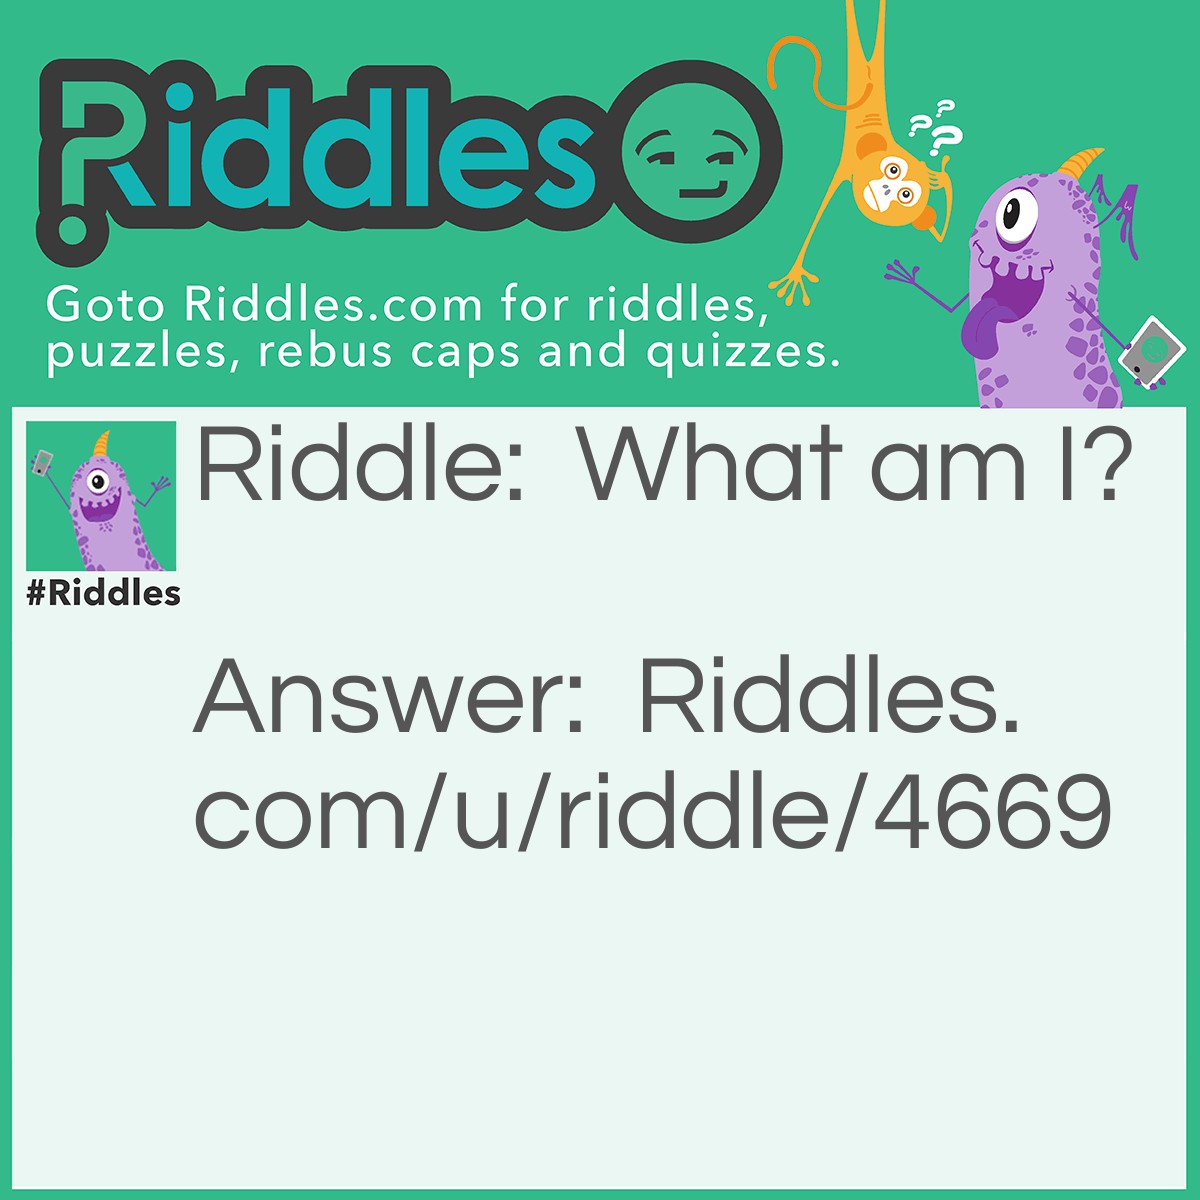 Riddle: What am I? Answer: A question.